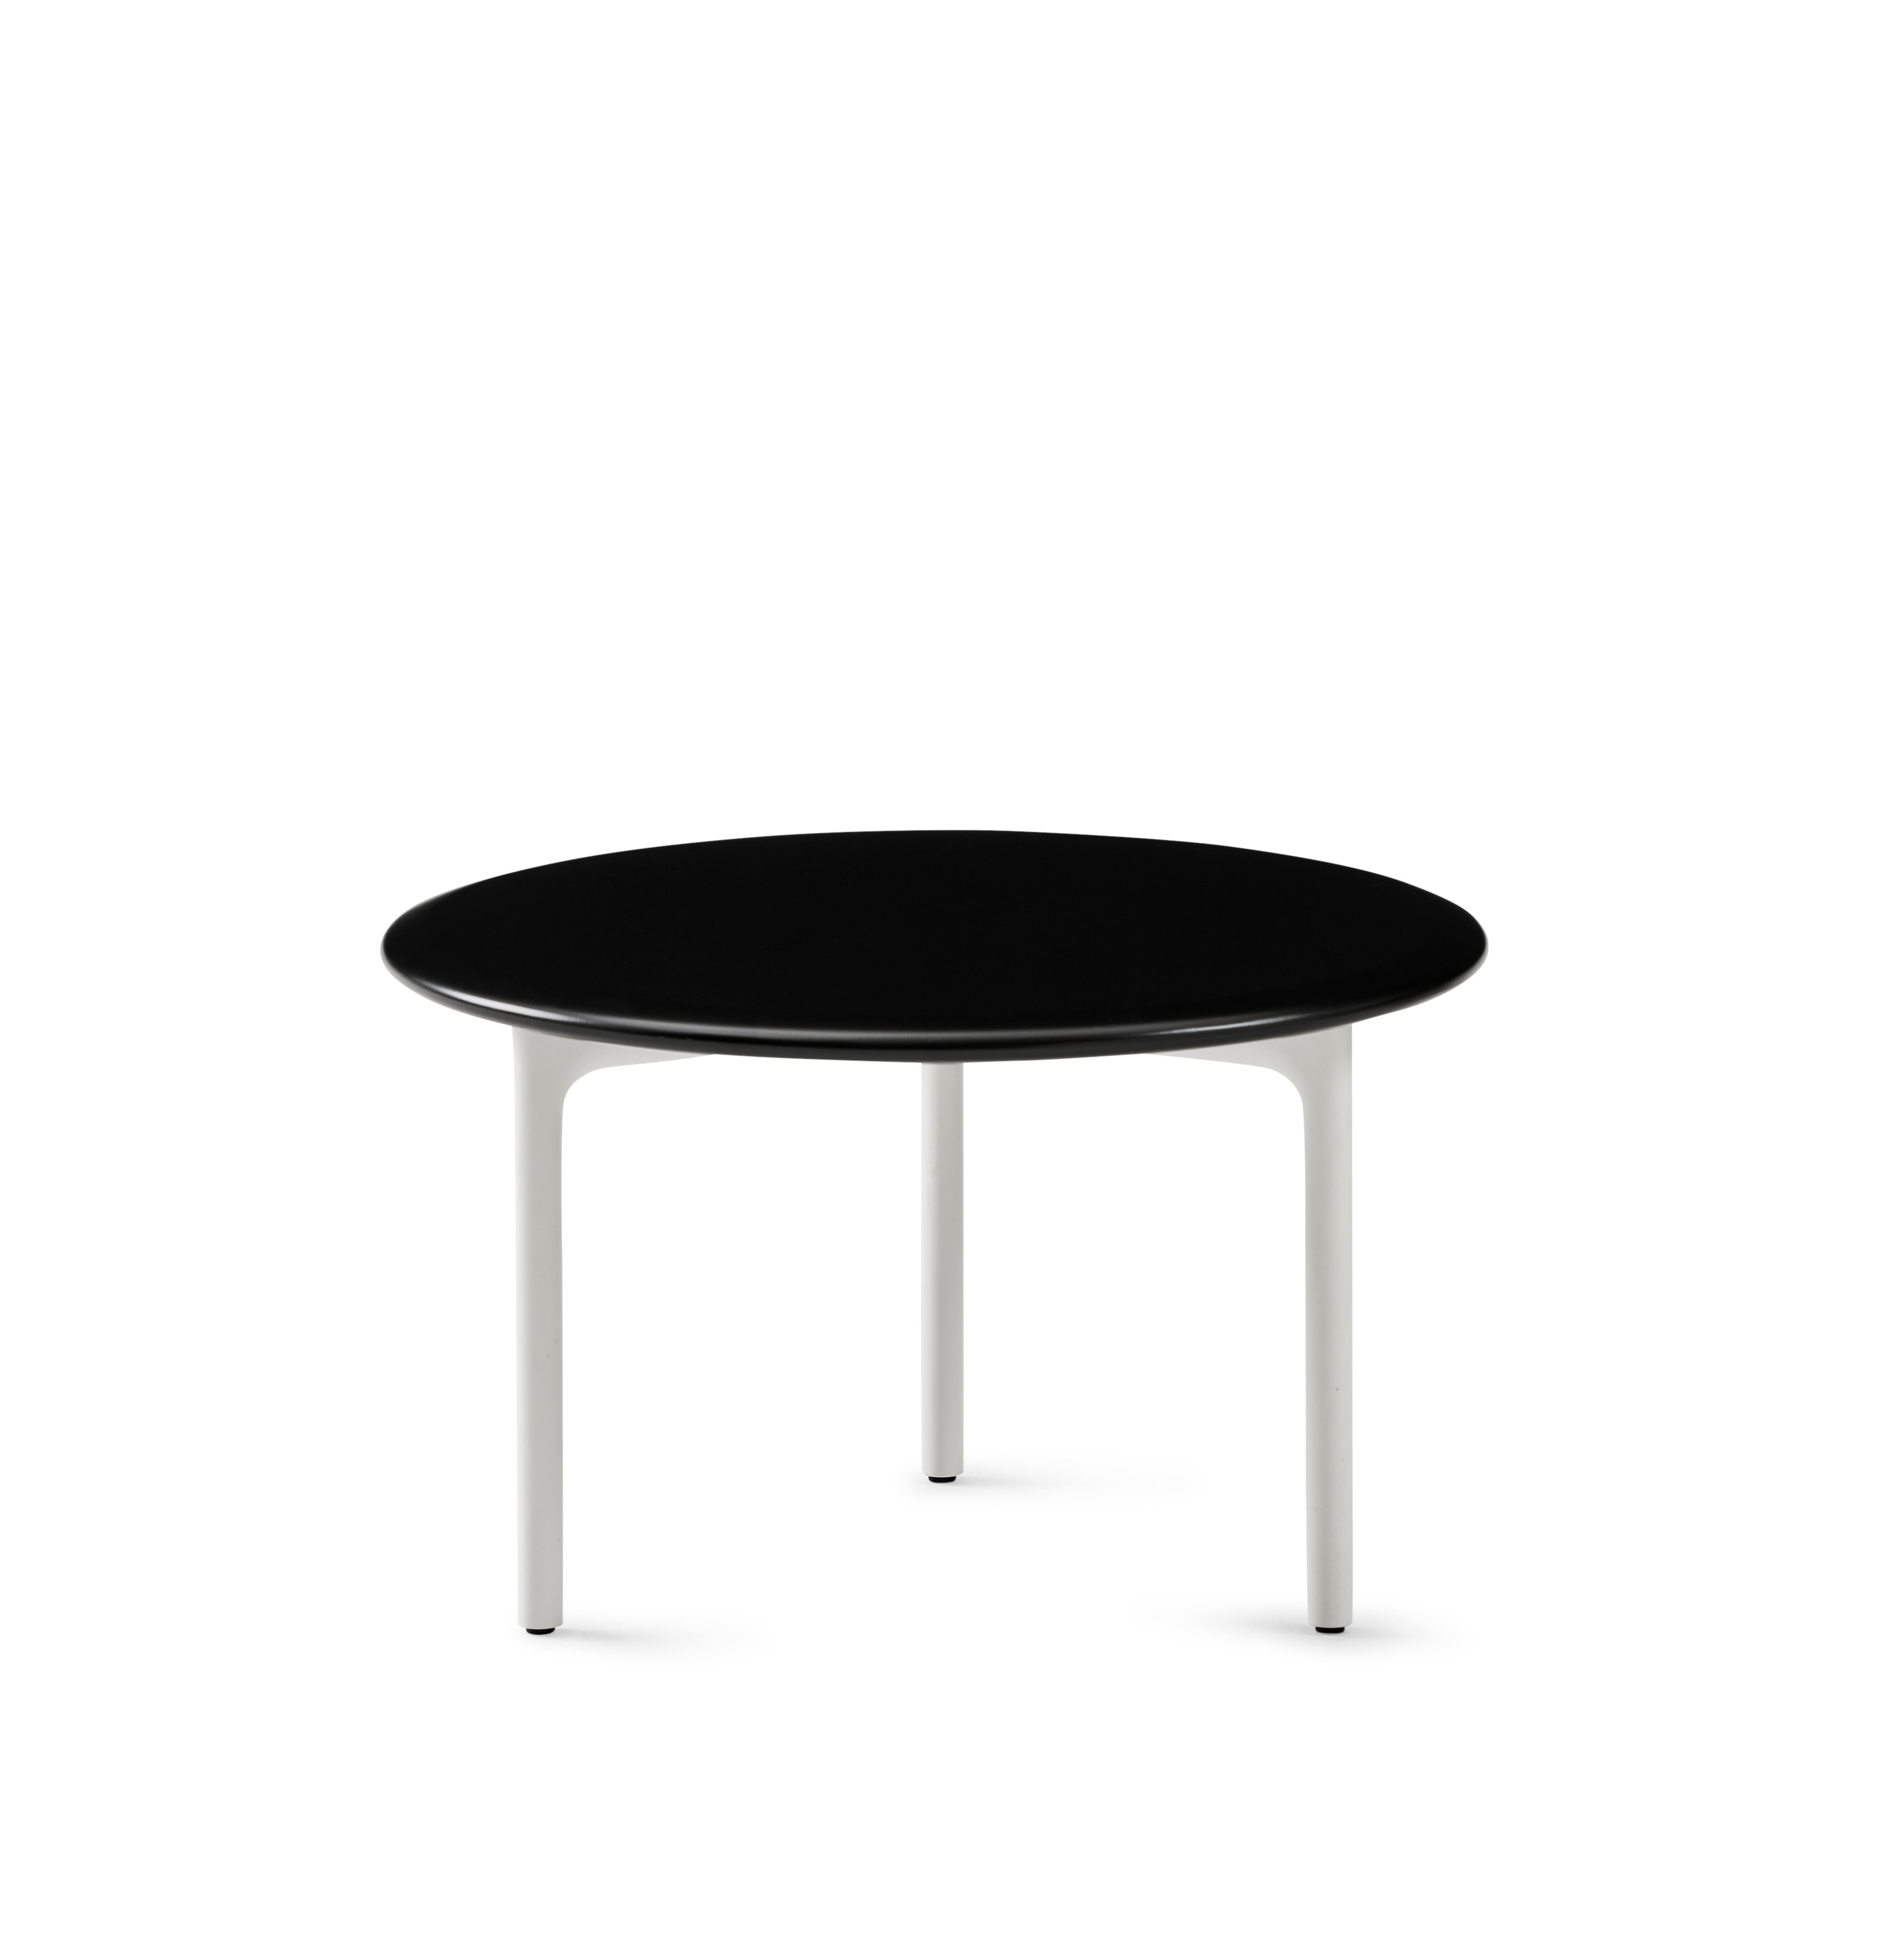 Detail side shot of Large Sprig Table with Black top and White base